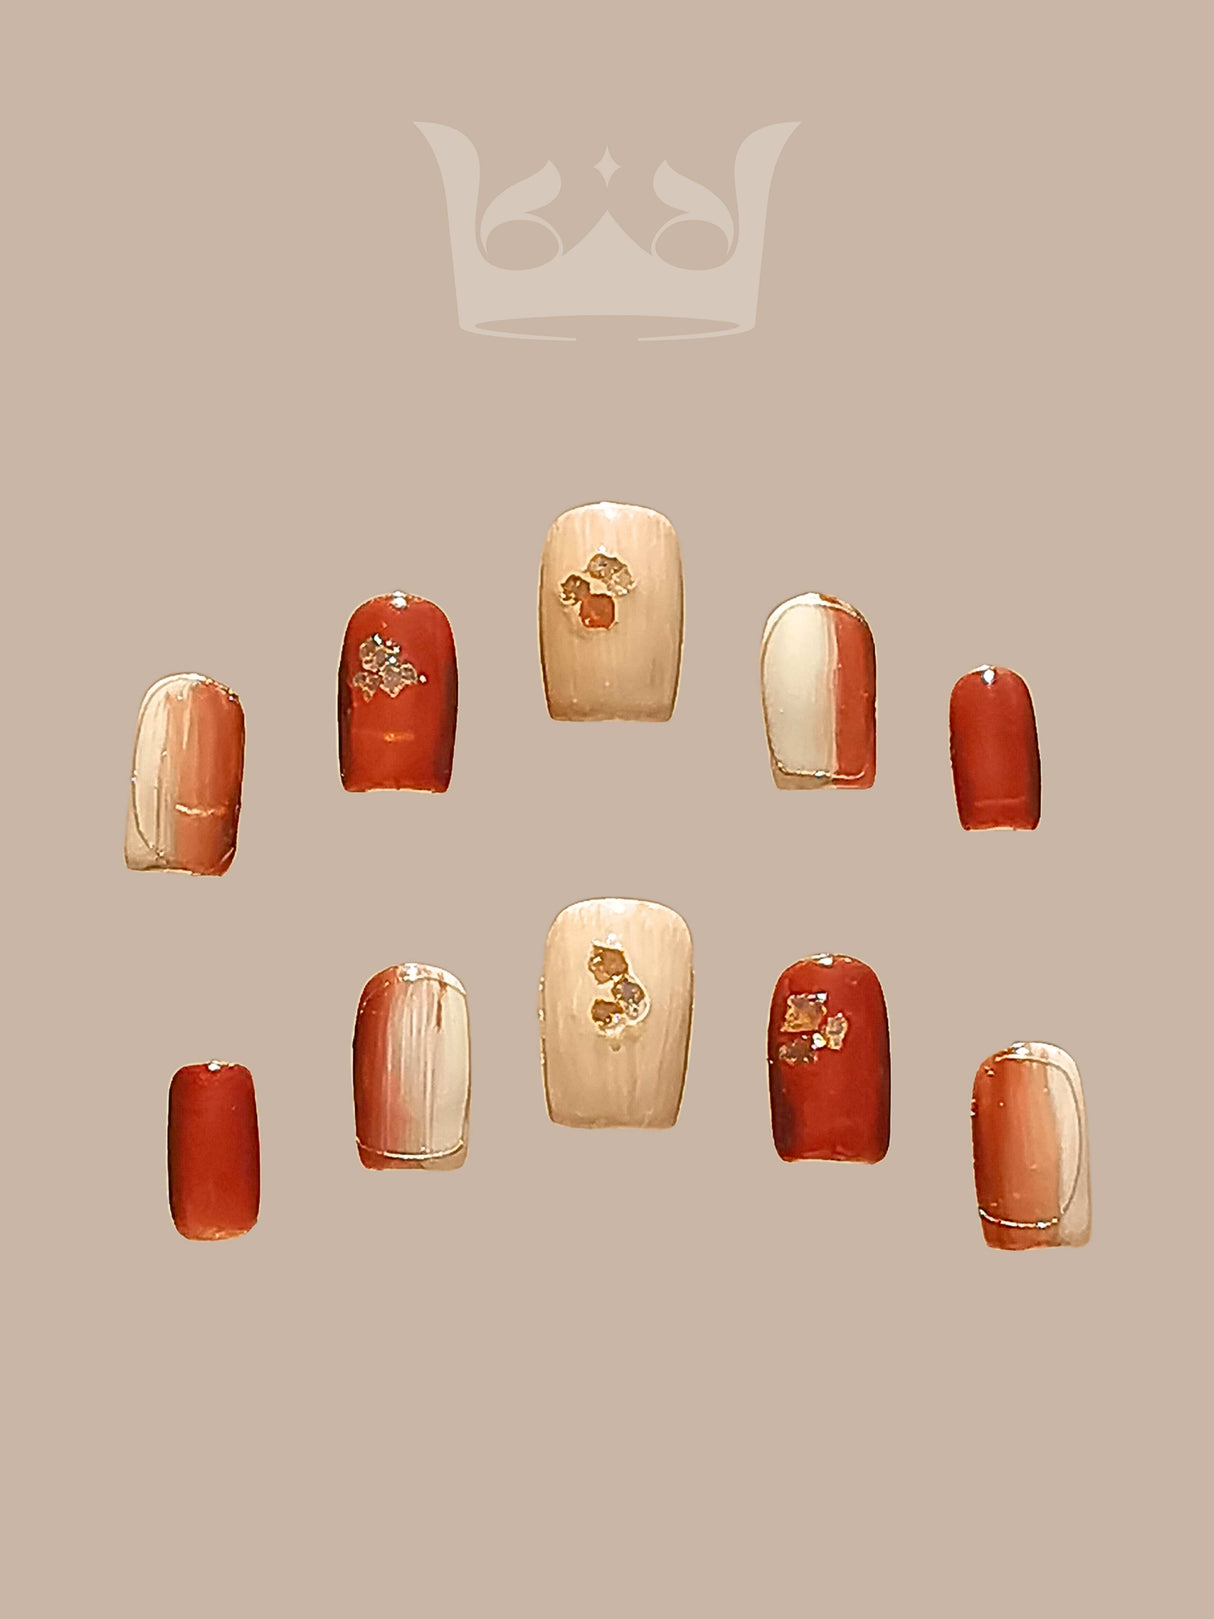 These press-on nails are for personal grooming and beautification, with a modern aesthetic. They come in various designs and colors for personal expression.